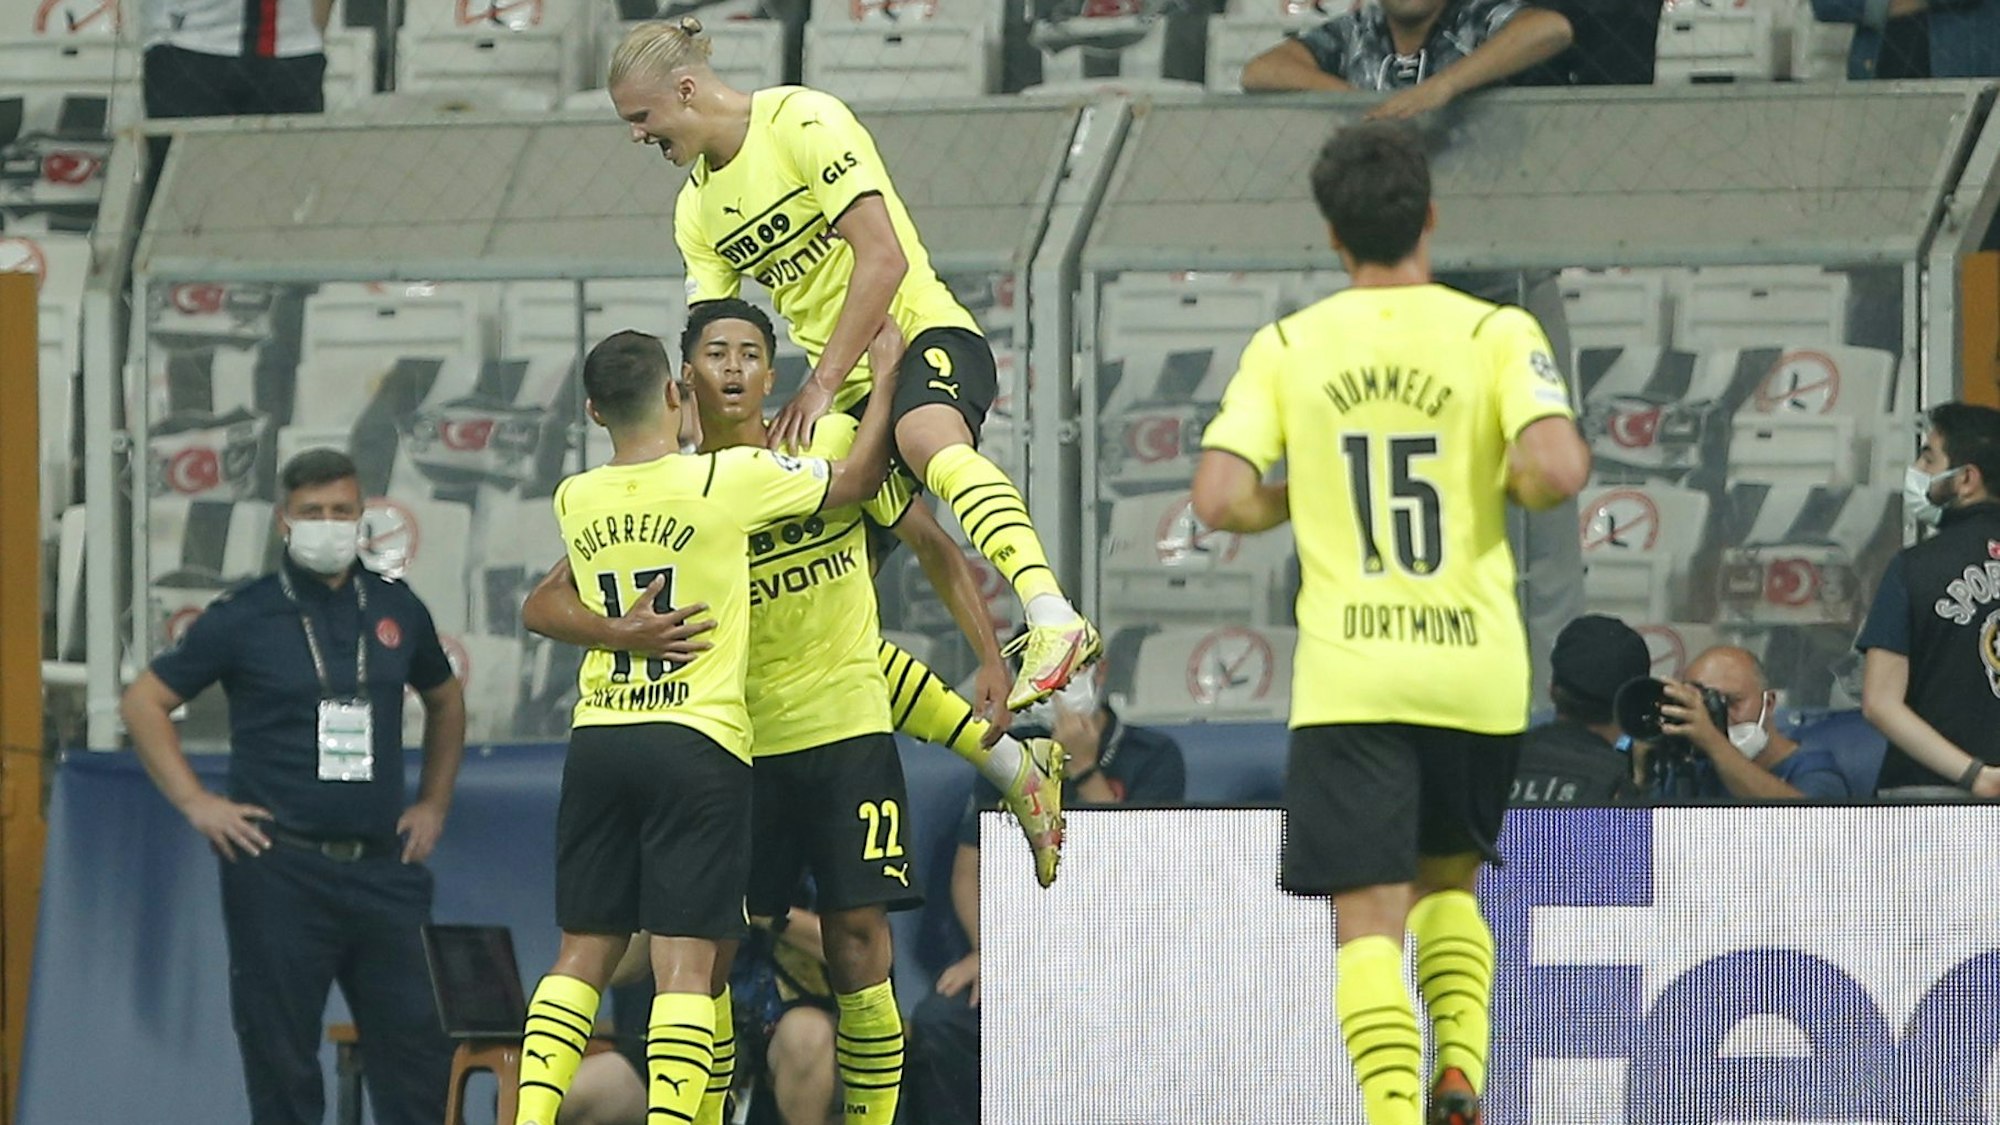 Dortmund players celebrate after Dortmund's Jude Bellingham scored his side's opening goal during the Champions League Group C soccer match between Besiktas and Borussia Dortmund at the Vodafone Park Stadium in Istanbul, Turkey, Wednesday, Sept. 15, 2021. (AP Photo)